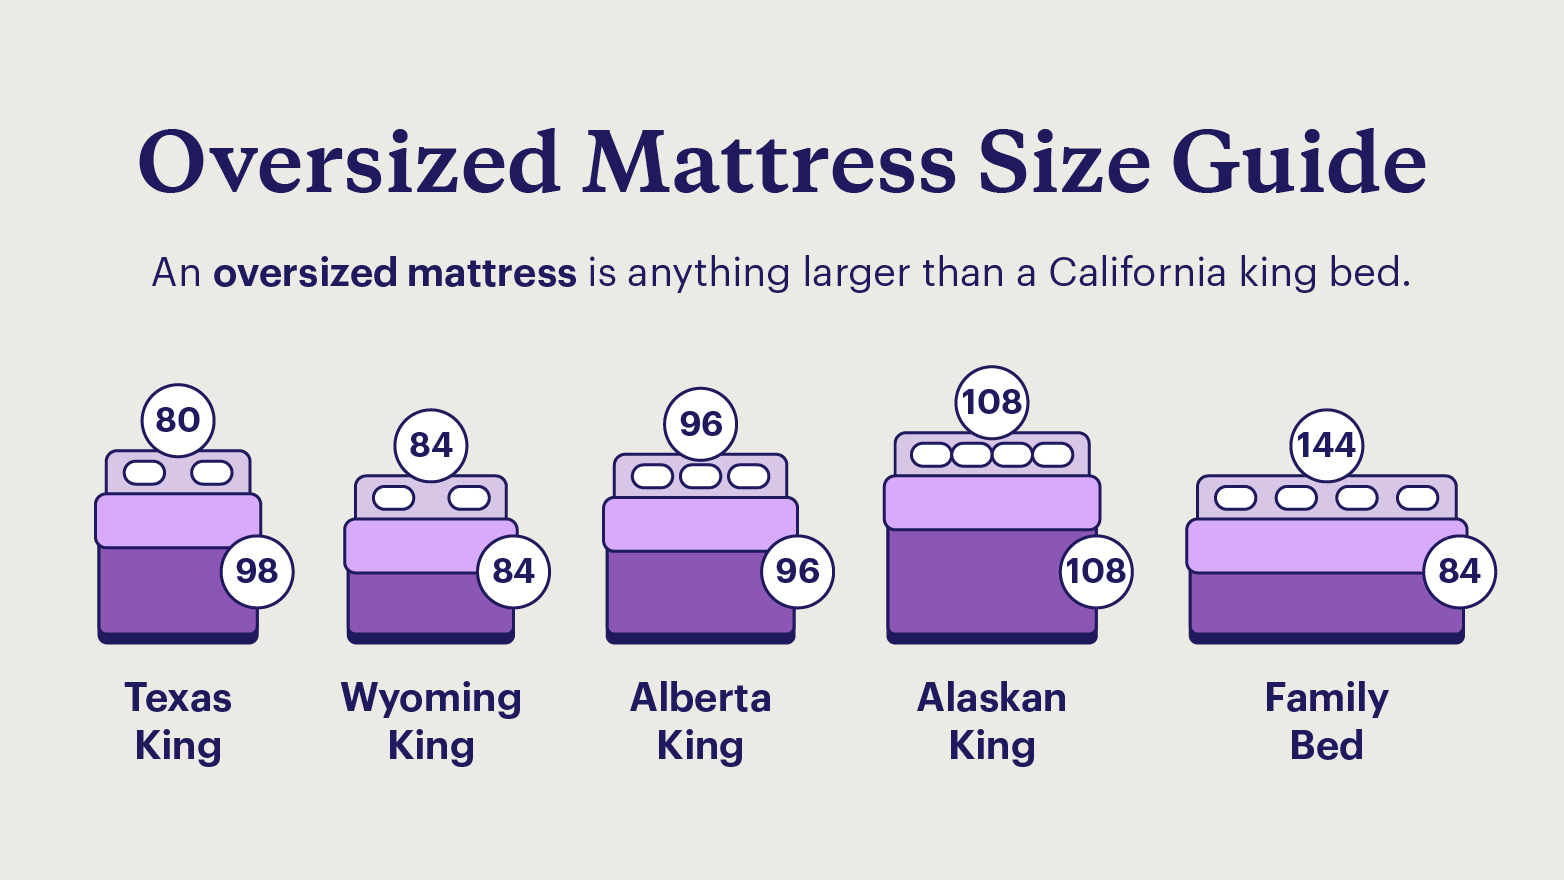 A graphic comparing the dimensions of the five most common oversized mattresses, including the Alaskan king bed.